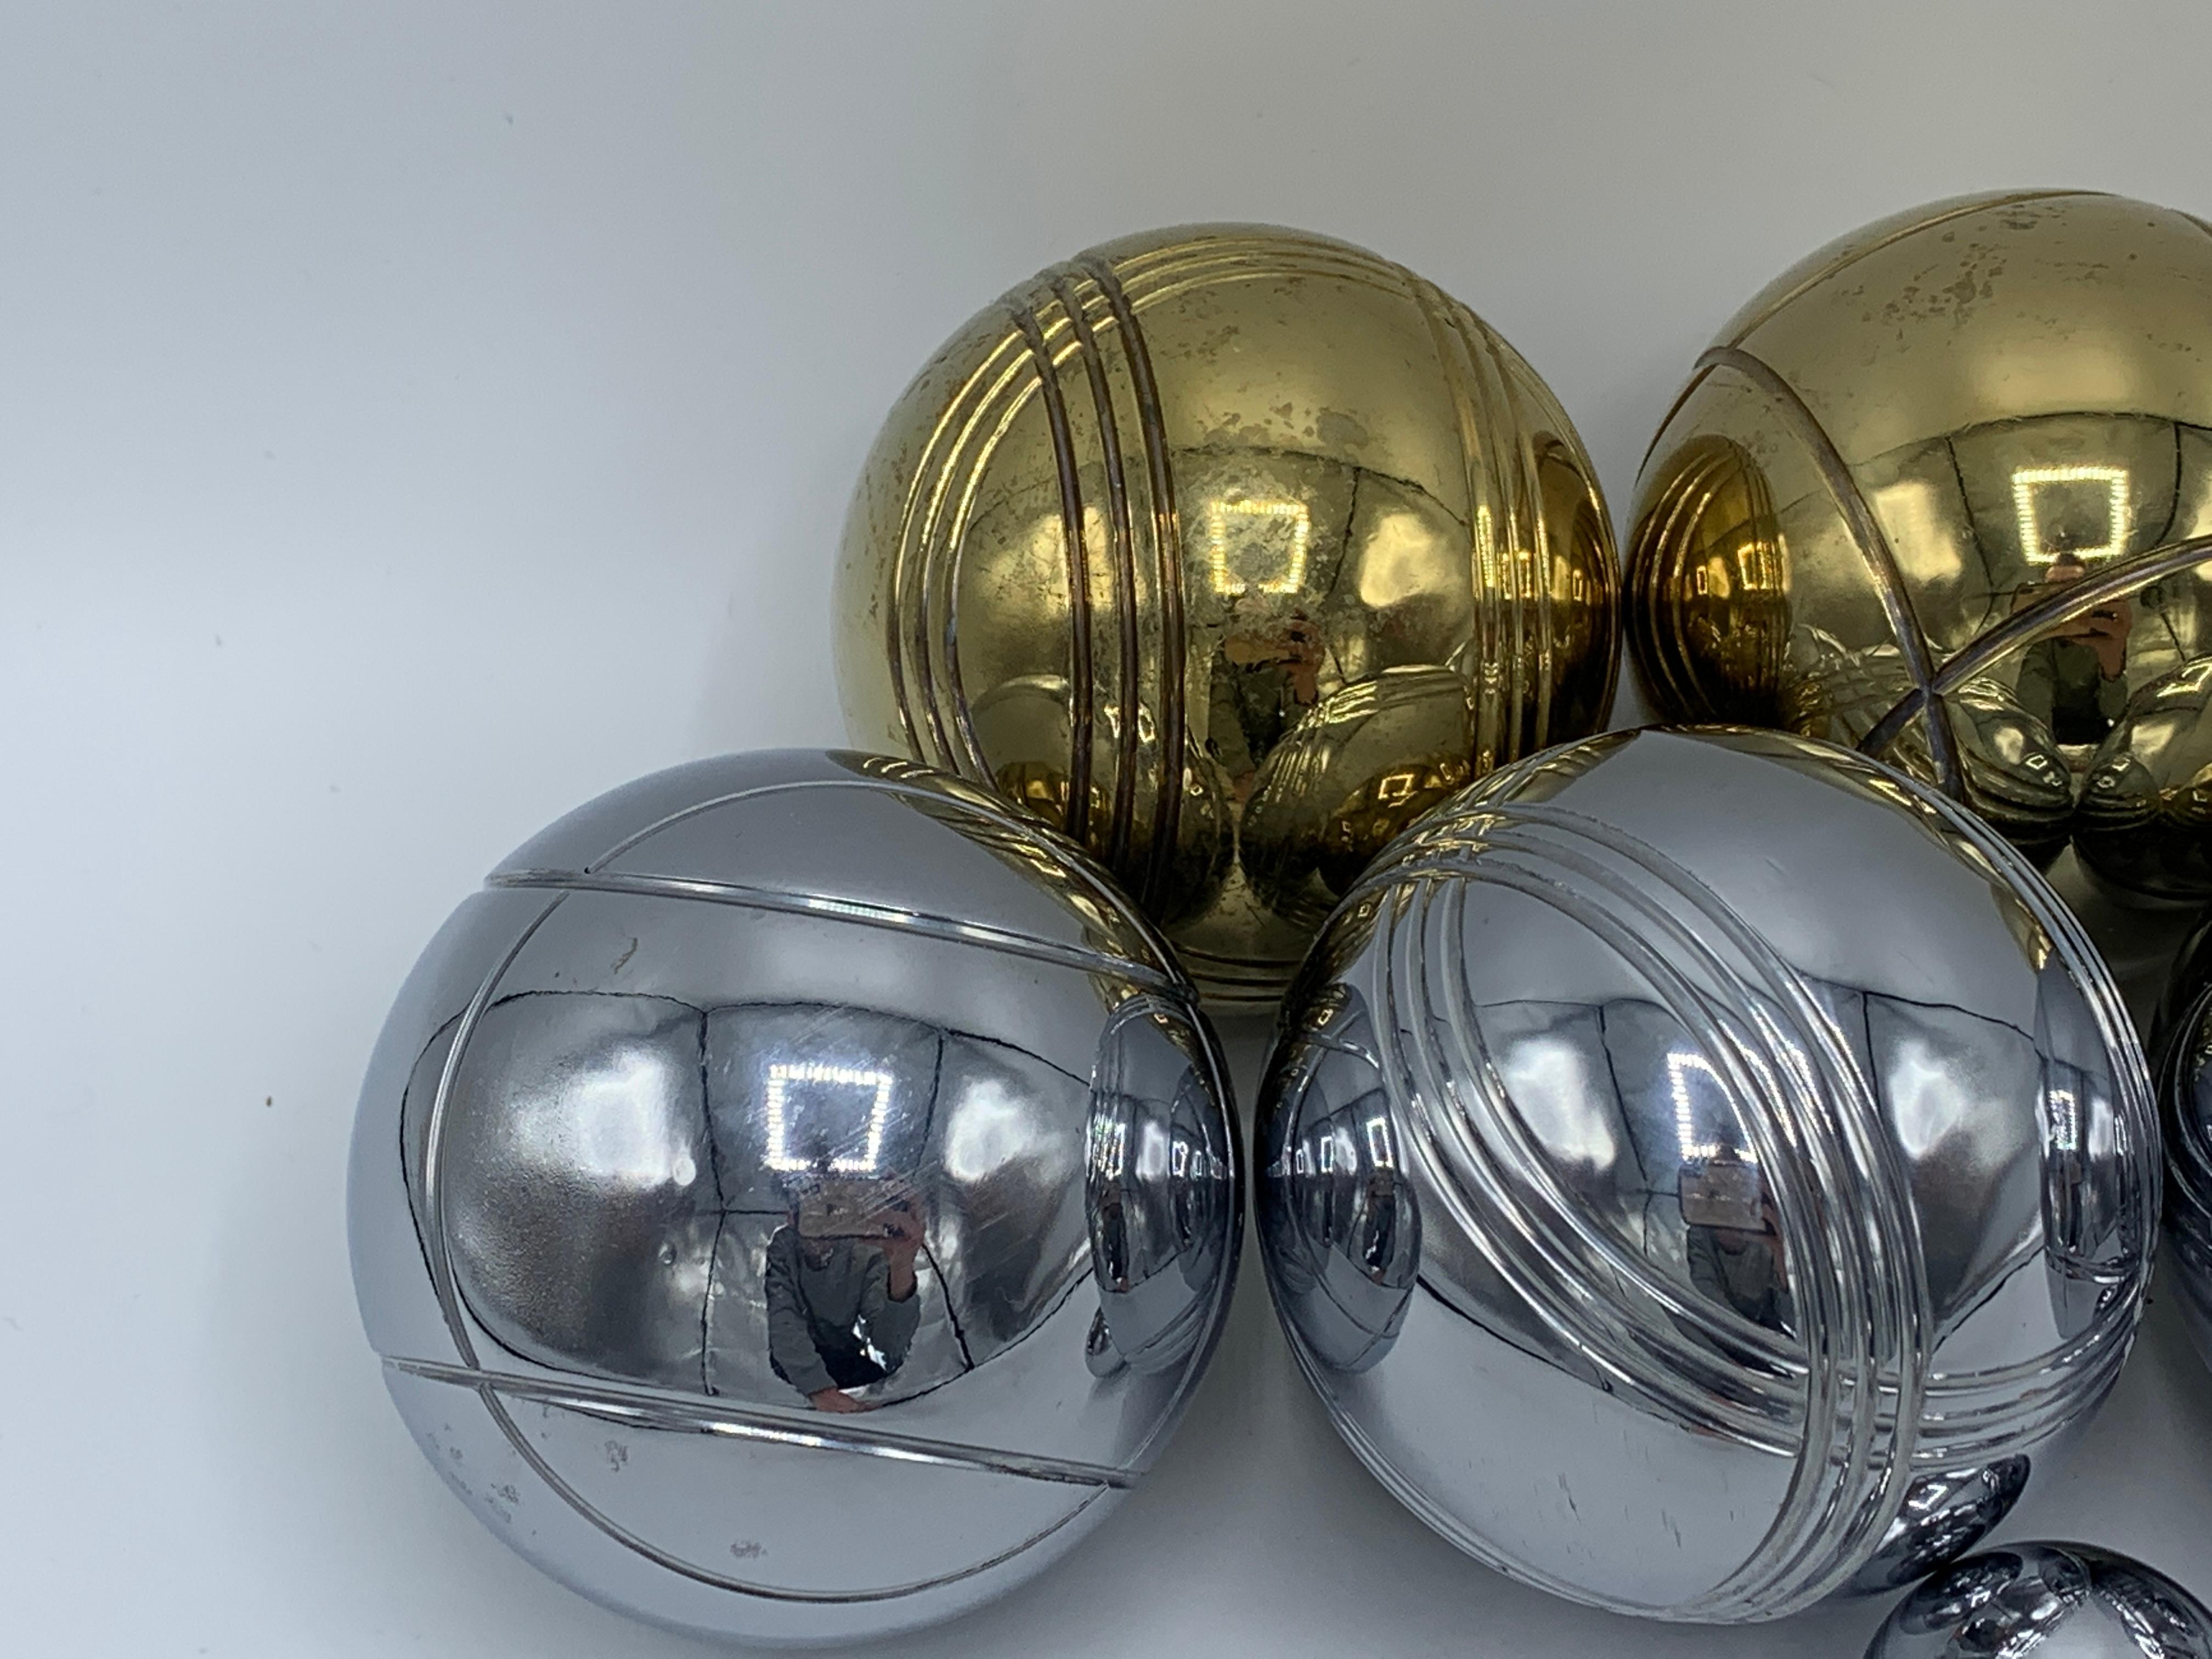 Listed is a stunning, 1960's Italian brass and chrome bocce ball set. Set includes four brass ball, four chrome ball, and one chrome pallino ball. Extremely heavy, with the whole set weighing 13lbs.